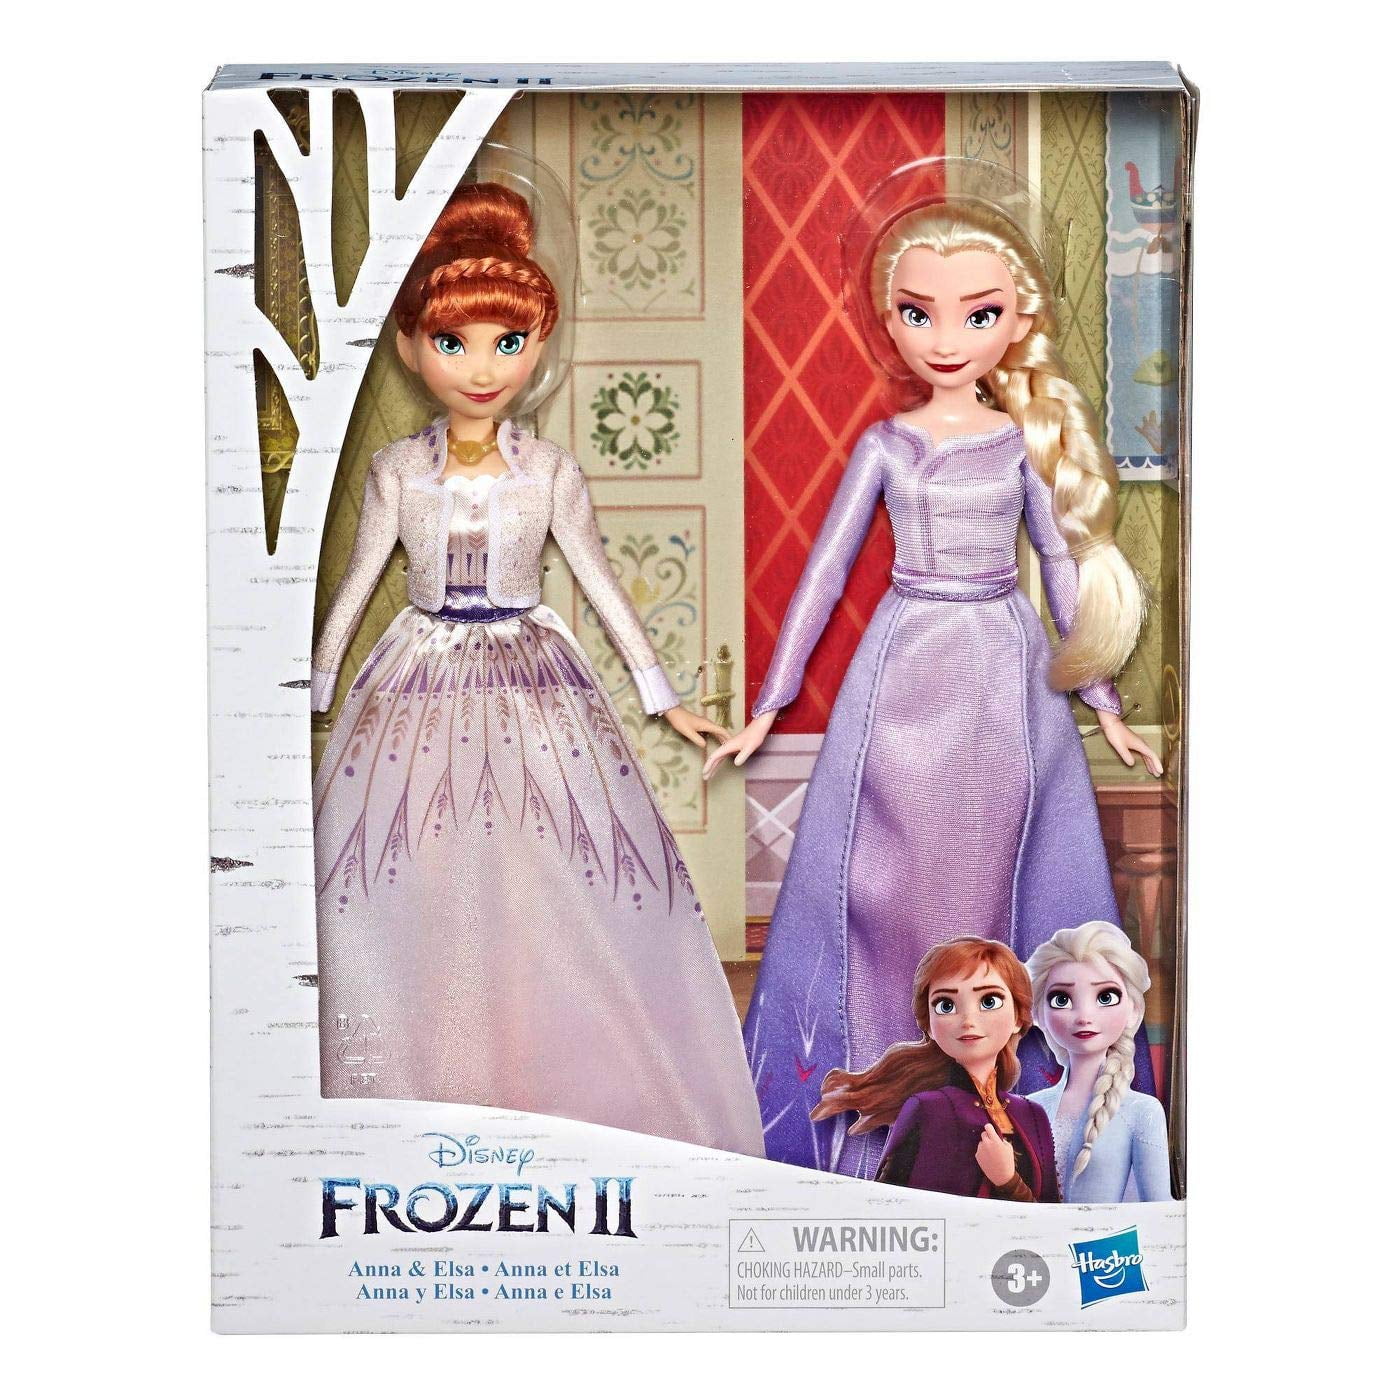 Elsa Frozen Fashion Doll Characters Toys 